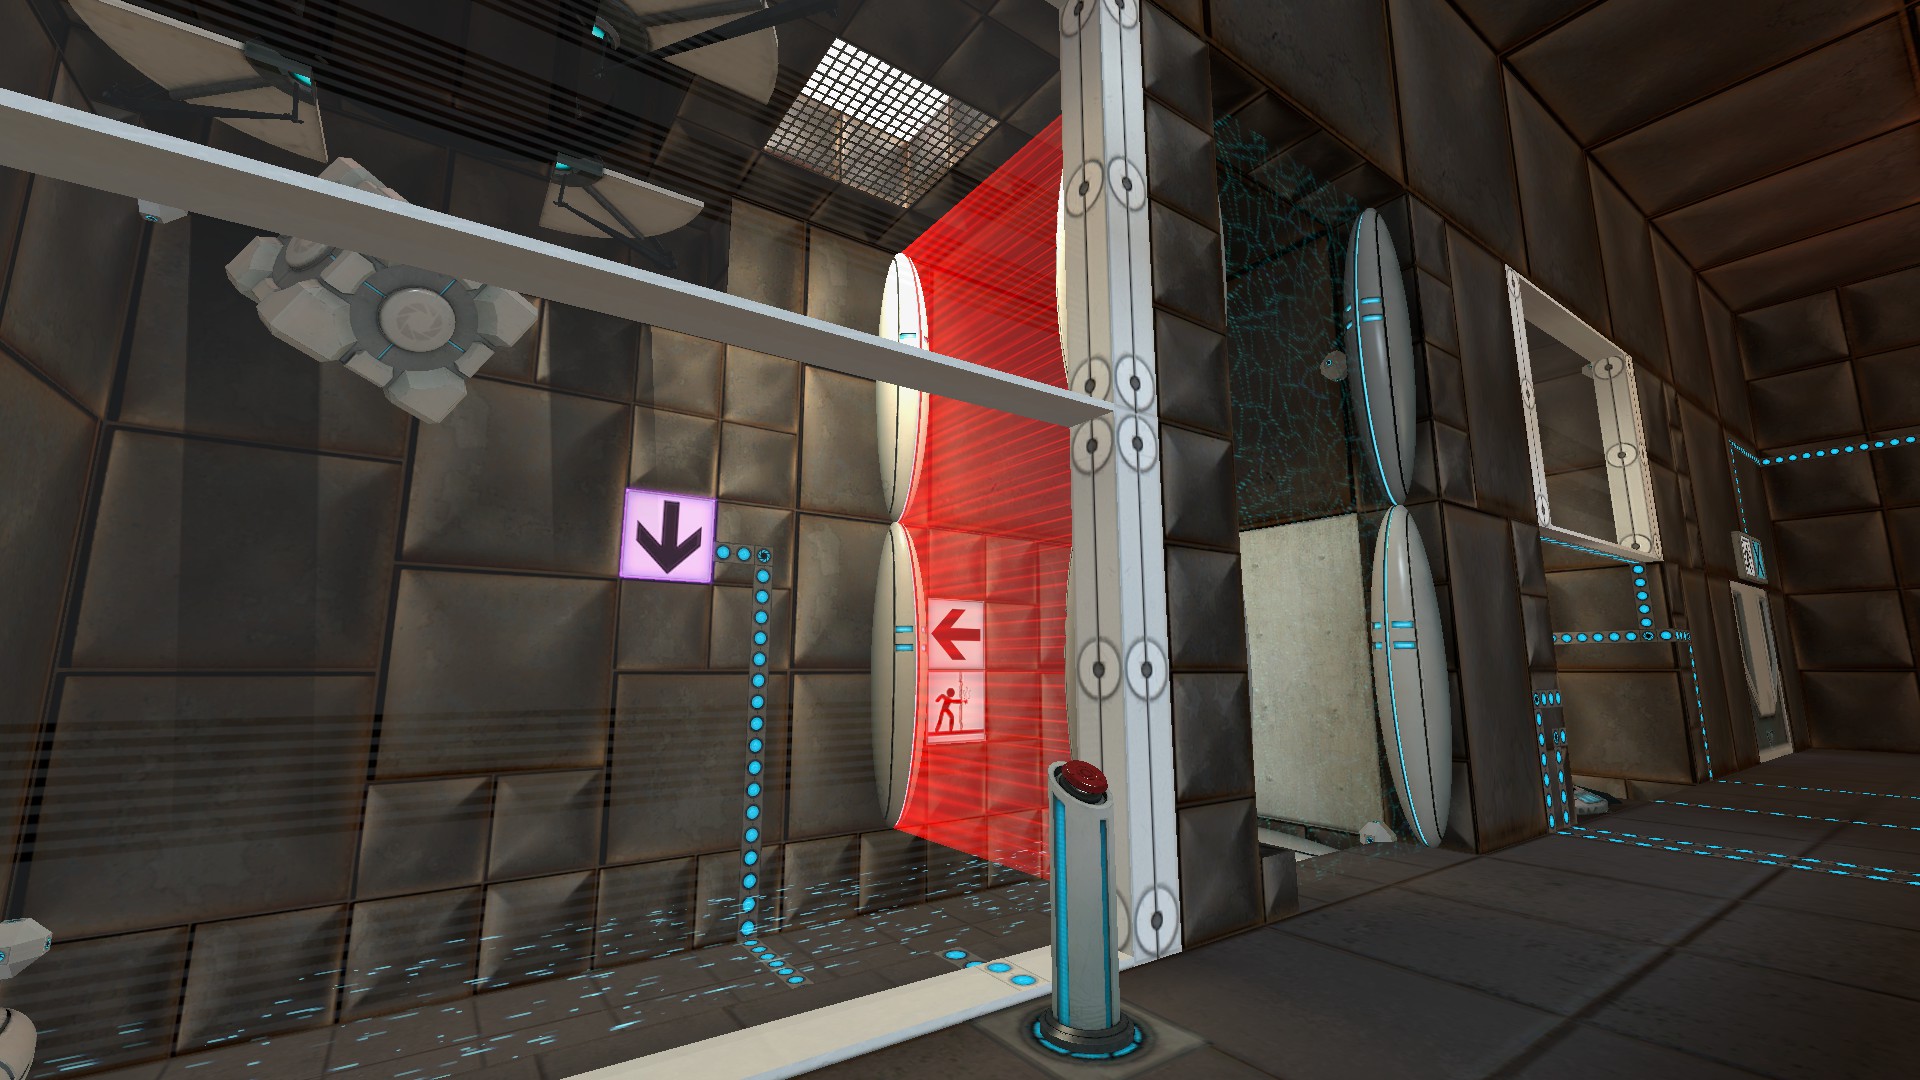 Behind glass, A vital apparatus vent drops cubes into an emancipation grid over the floor, and a gravity field indicator on the wall points down.  To the side, behind a hard light wall, are a red laser wall and a portalable wall.